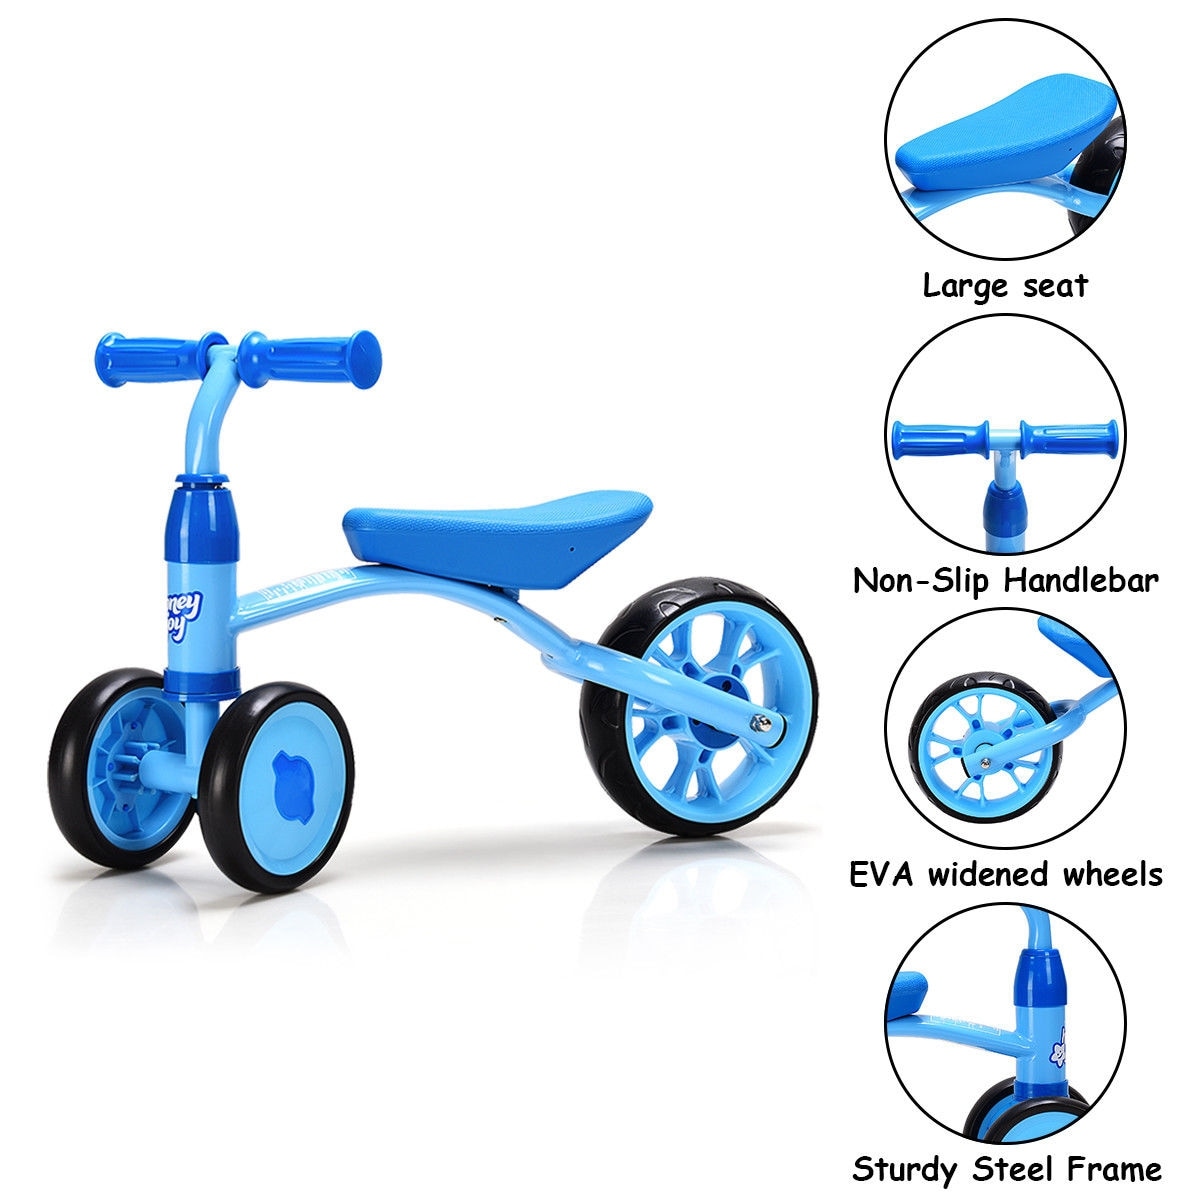 no pedal tricycle